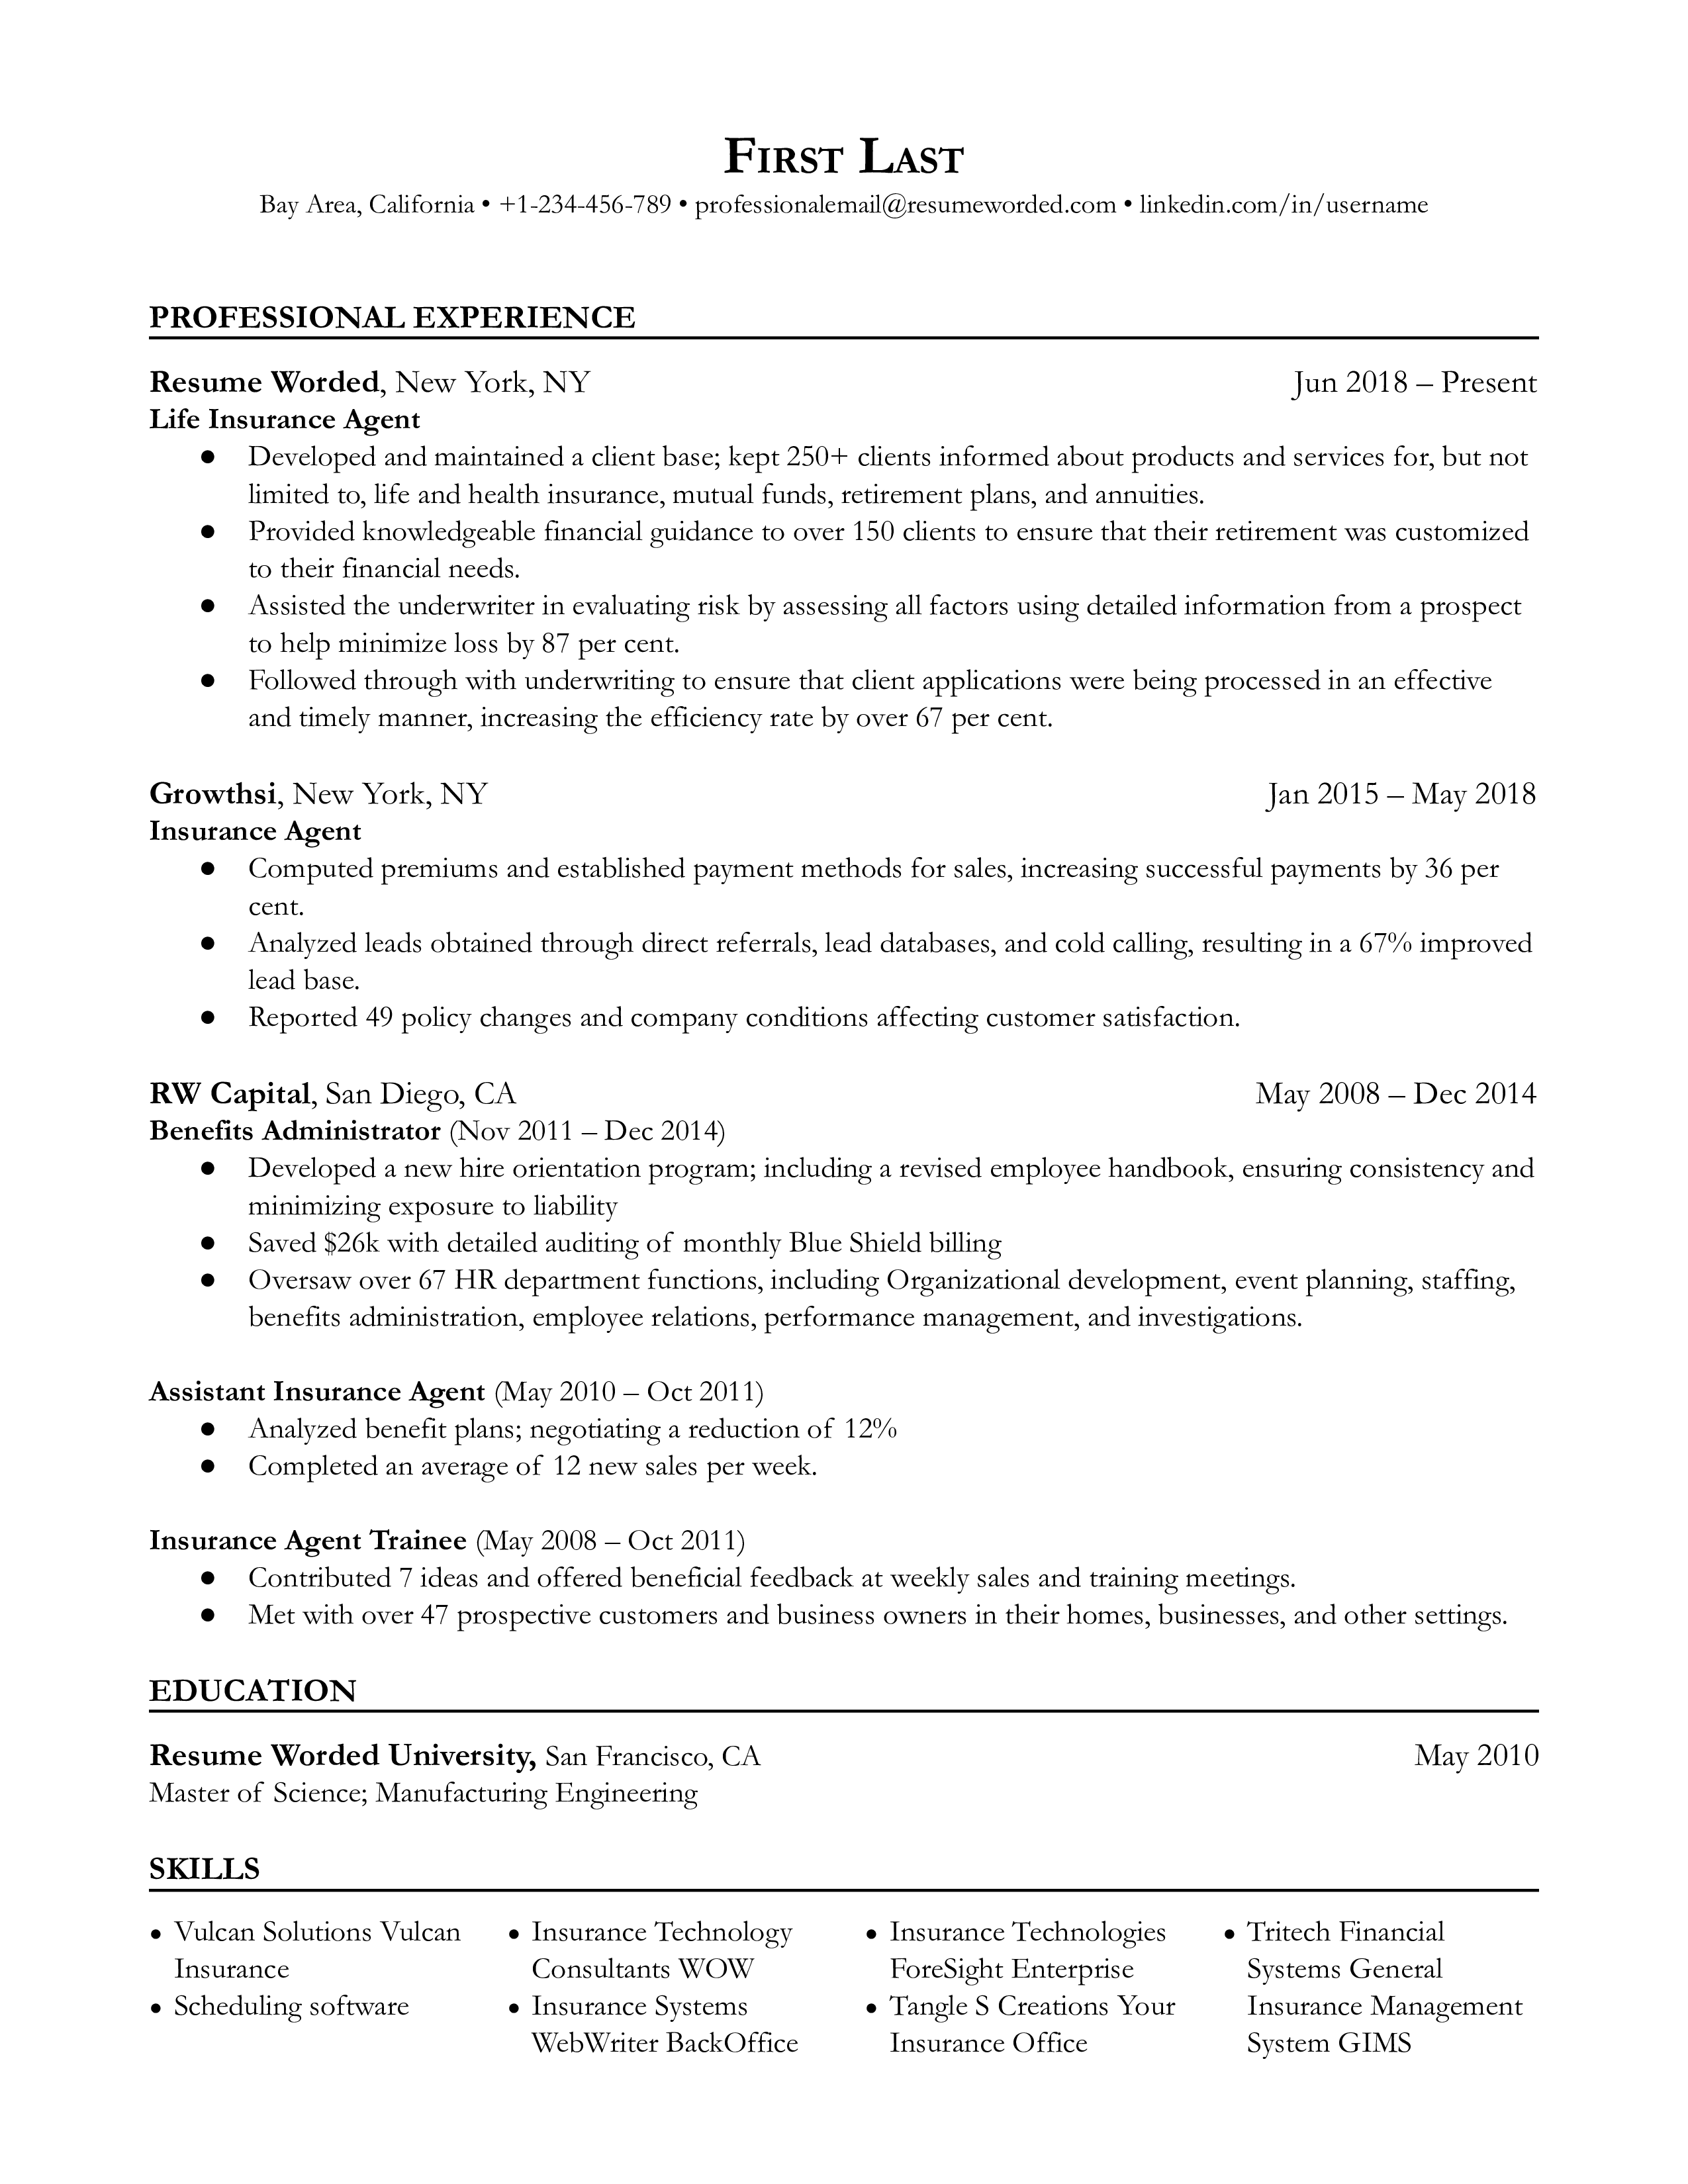 Life insurance agent resume sample that highlights low barriers to entry and difficulty in staying in the position.